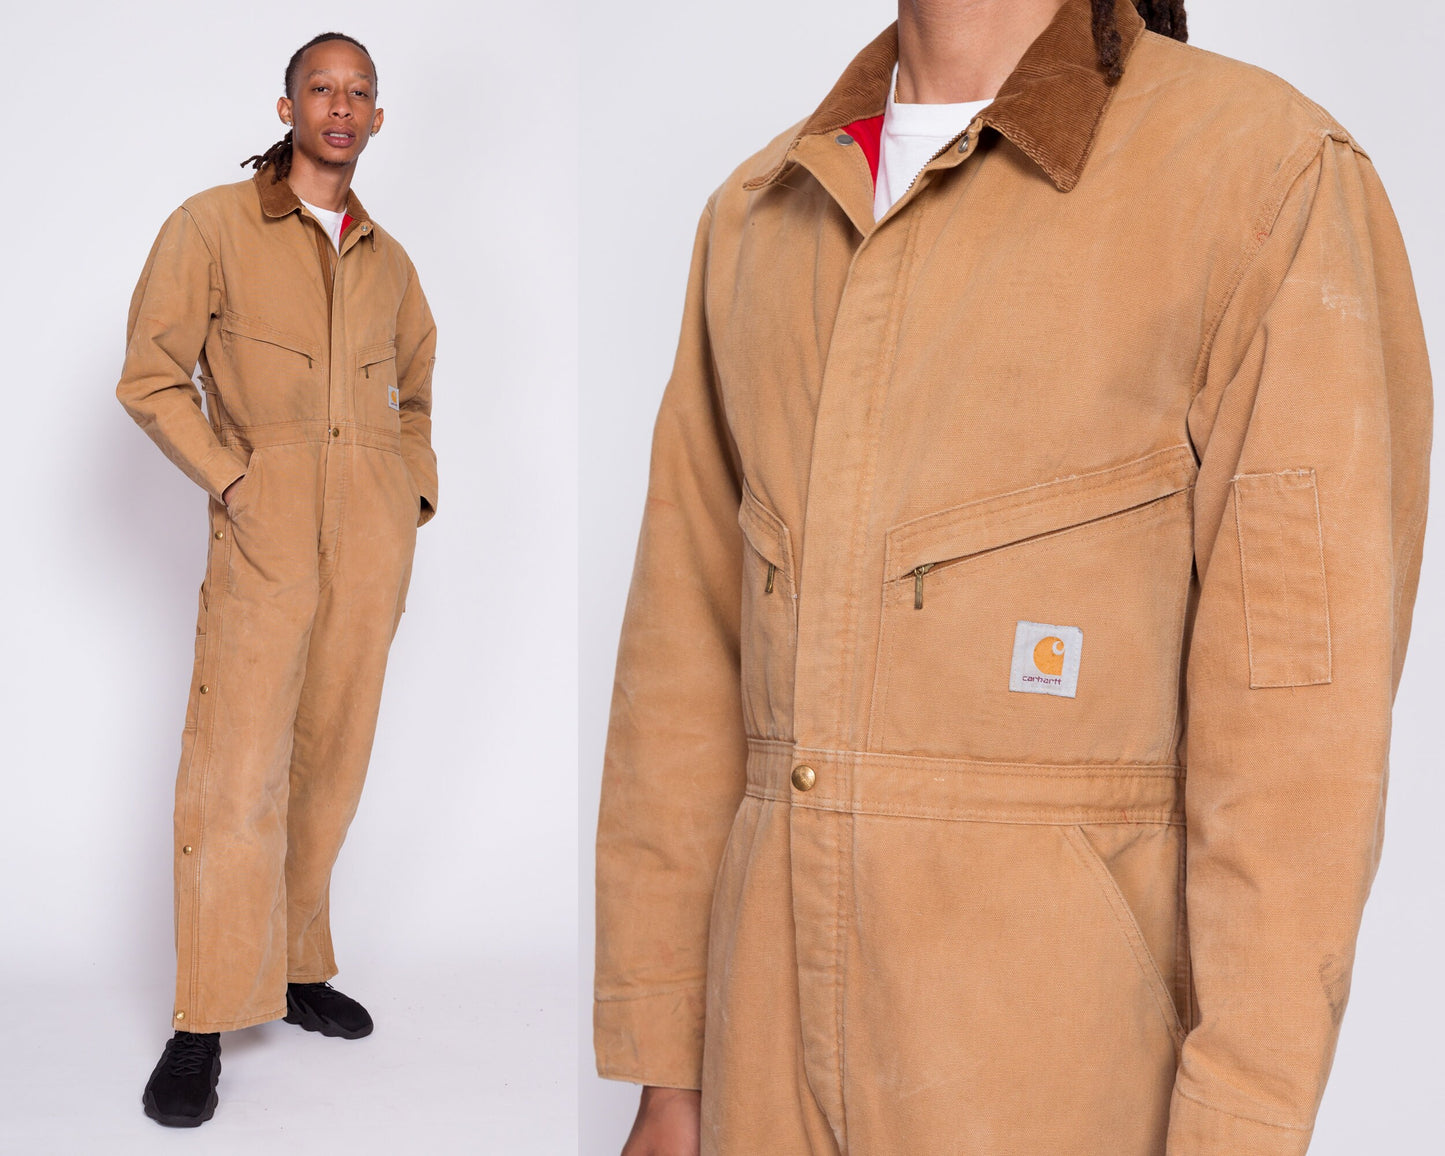 90s Carhartt Made In USA Insulated Coveralls - 42 Short | Vintage Tan Cotton Duck Canvas Workwear Zip Front Jumpsuit